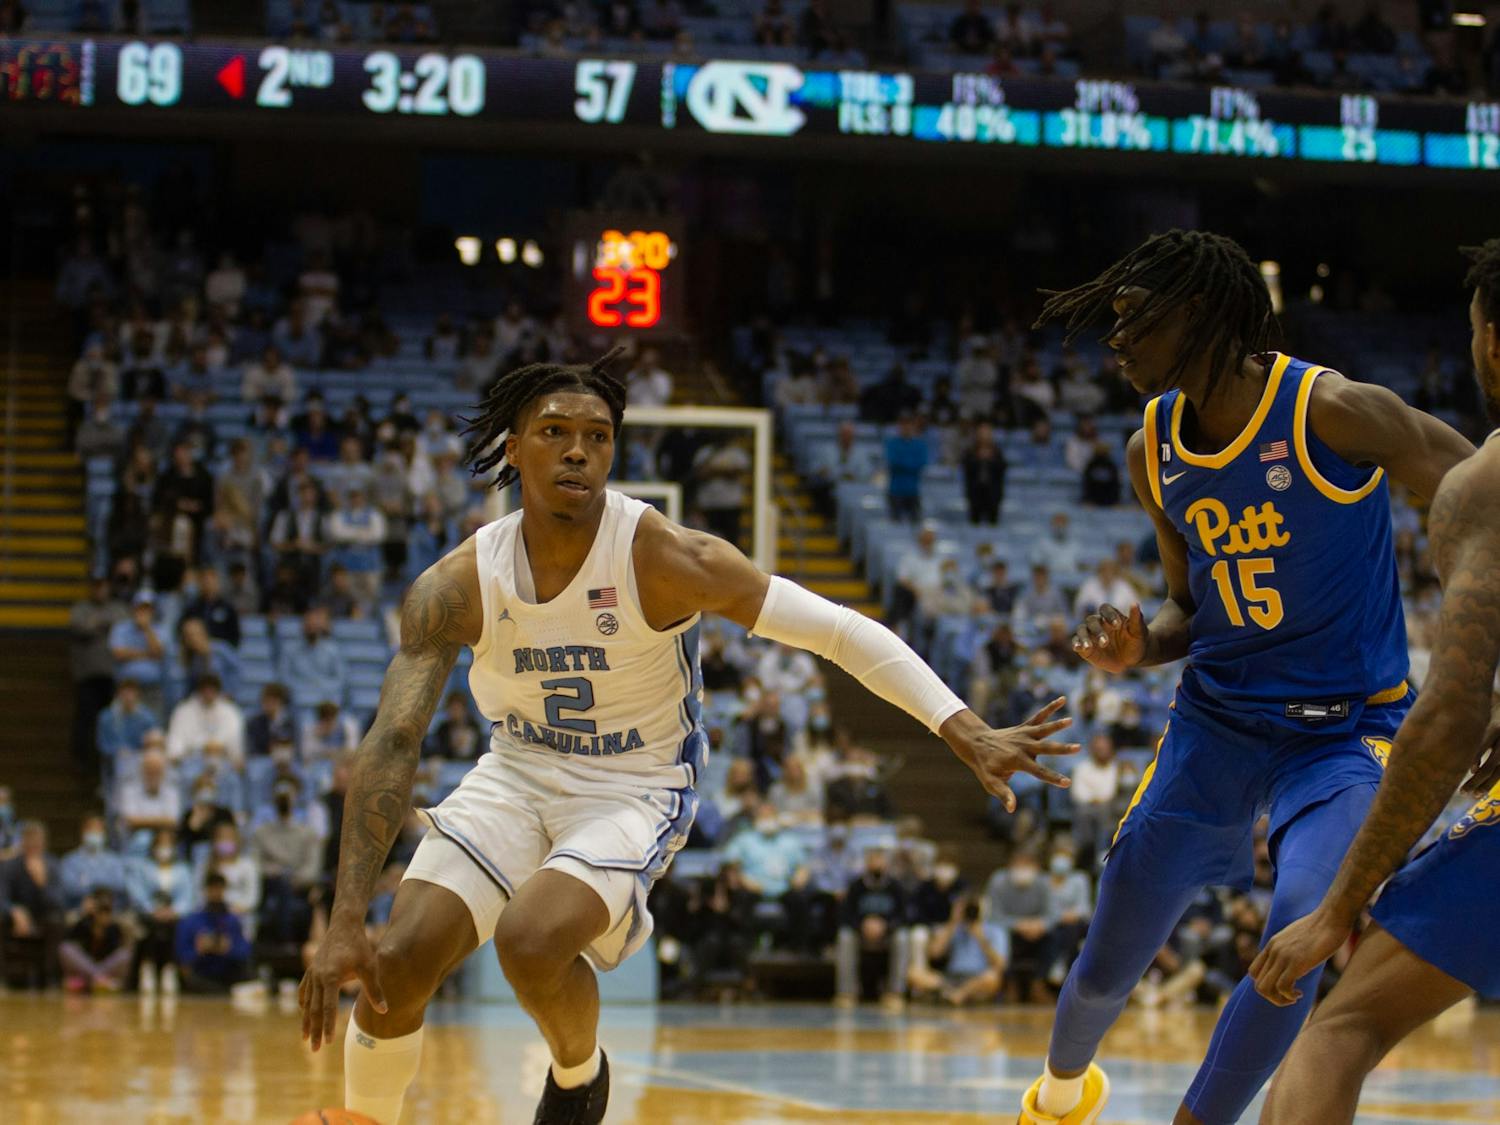 UNC sophomore guard Caleb Love (2) dribbles the ball down court at a UNC men's basketball game against Pittsburgh in the Dean Smith Center on Wednesday, Feb. 16, 2022. Pittsburgh won 76-67.